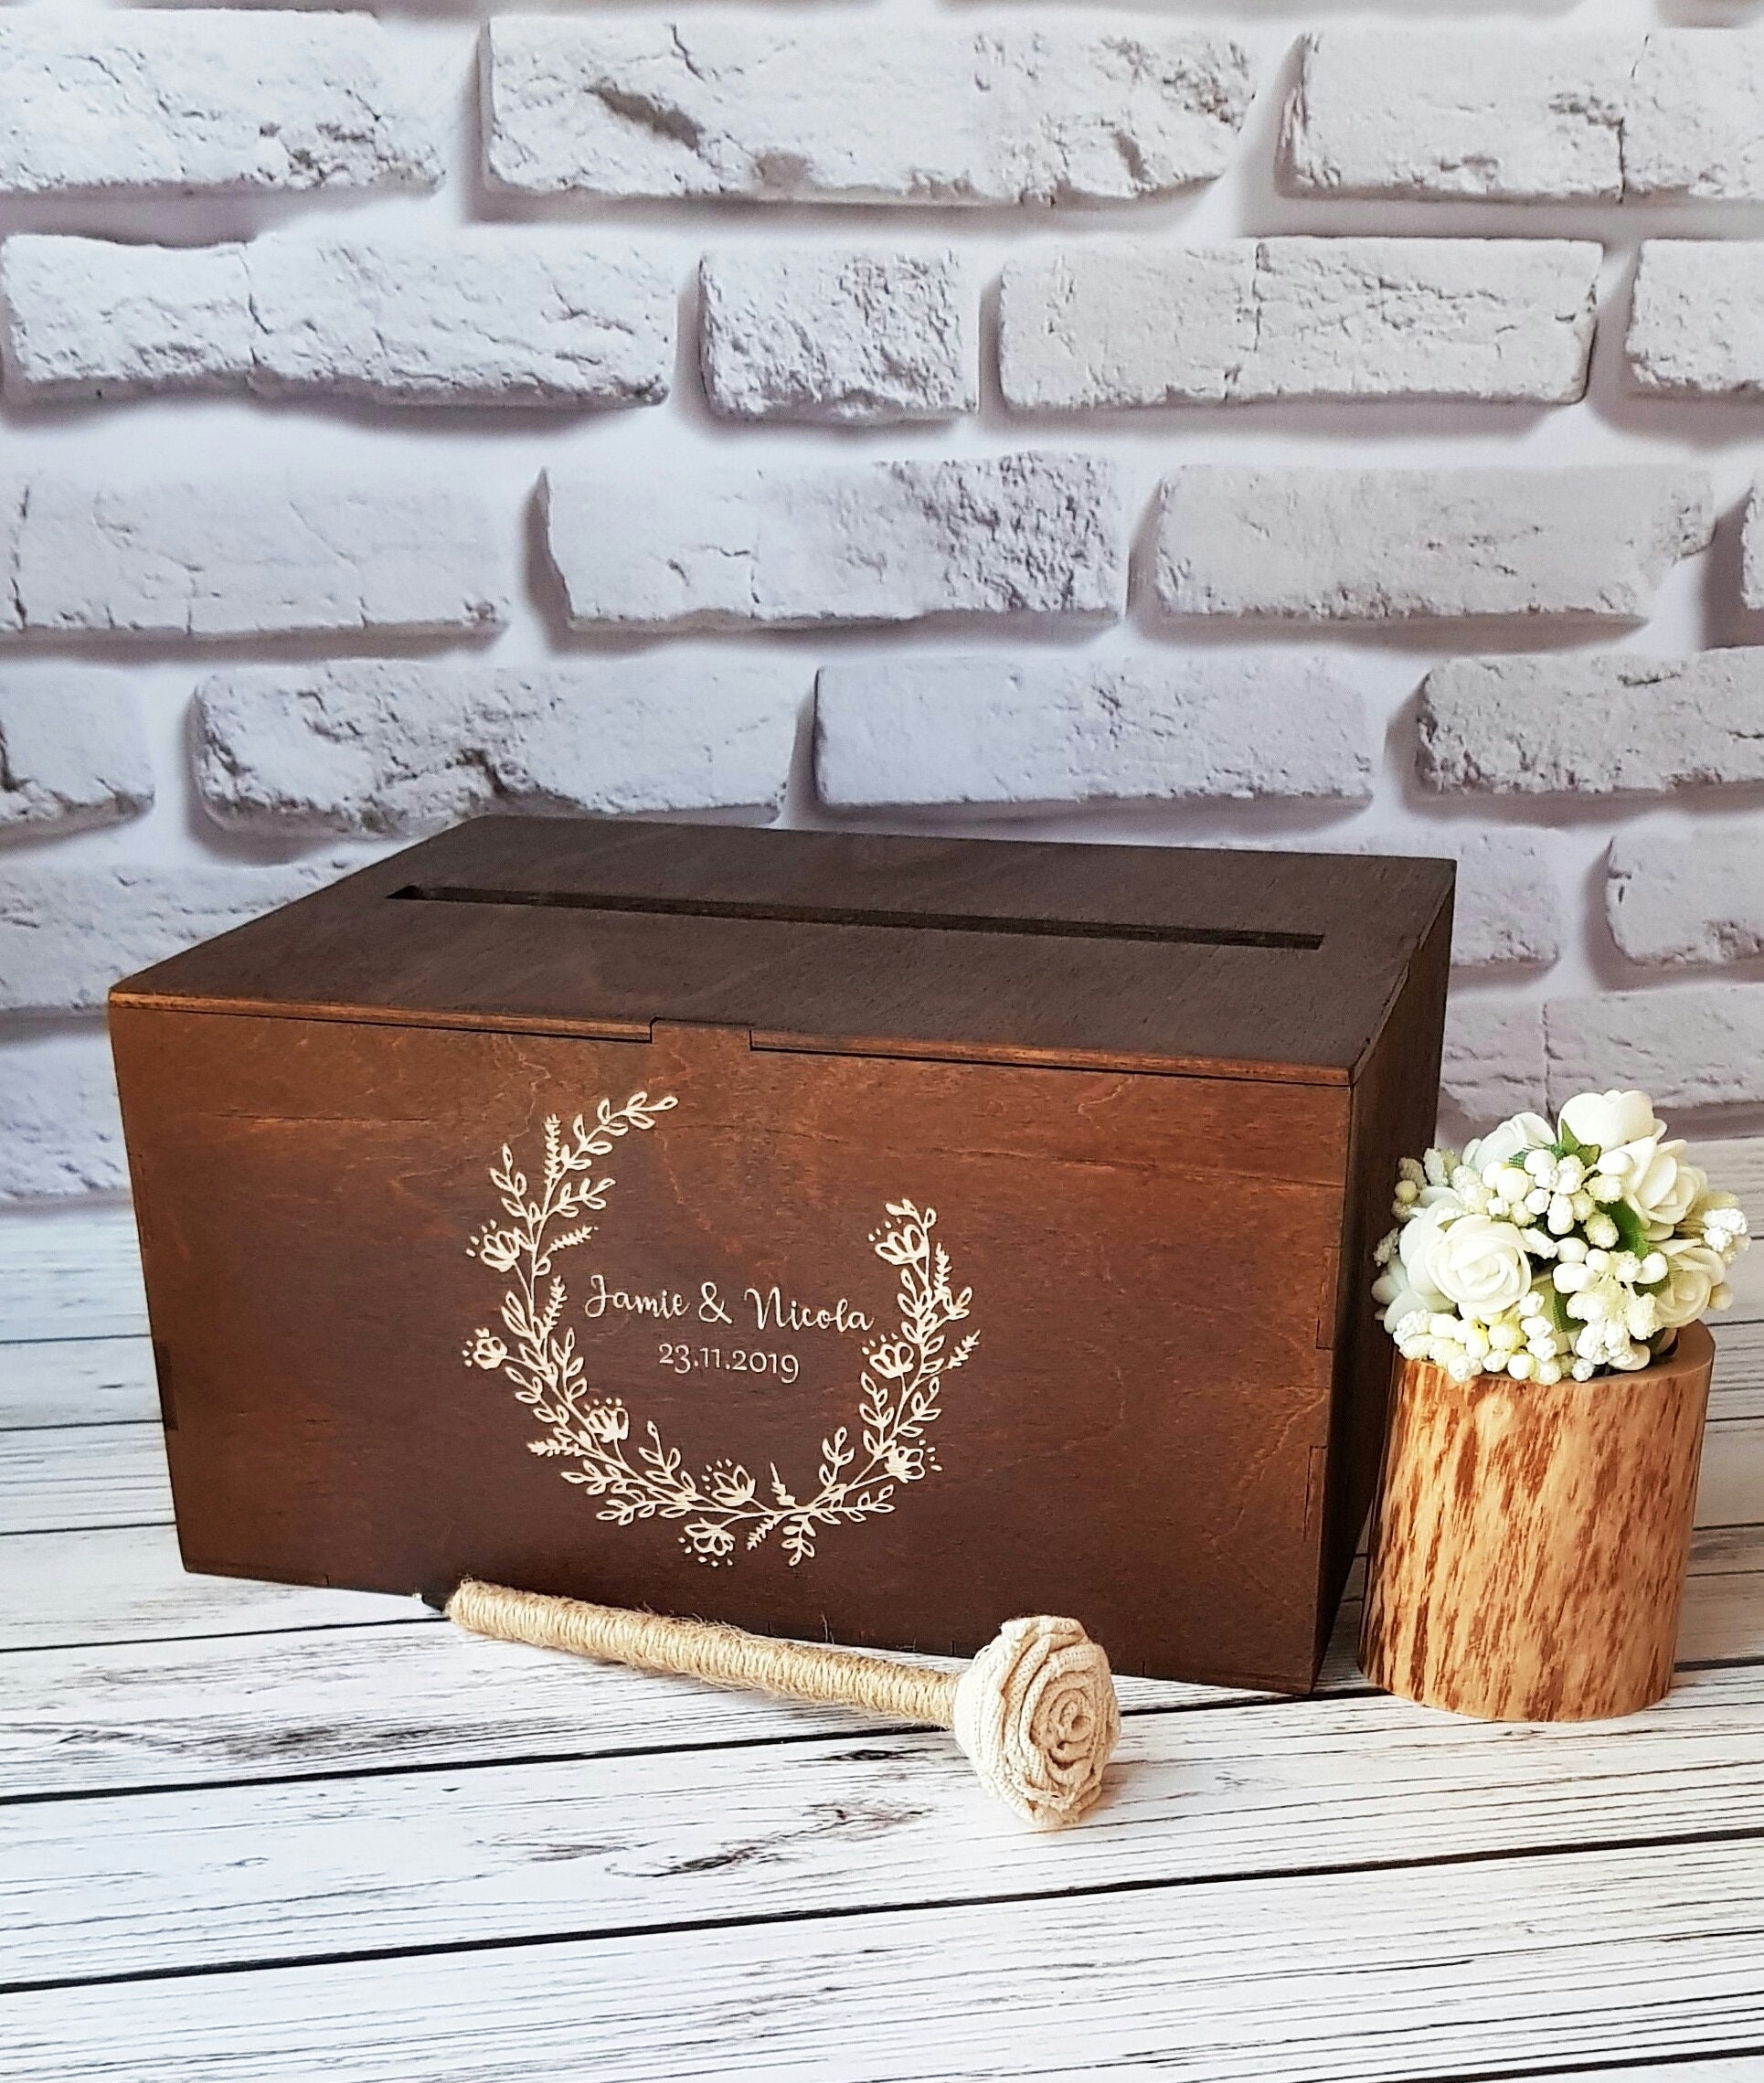 MyGift Wedding Card Box - Rustic Burnt Brown Wood Reception Gift Card/Thank  You Cards Holder with Sl…See more MyGift Wedding Card Box - Rustic Burnt